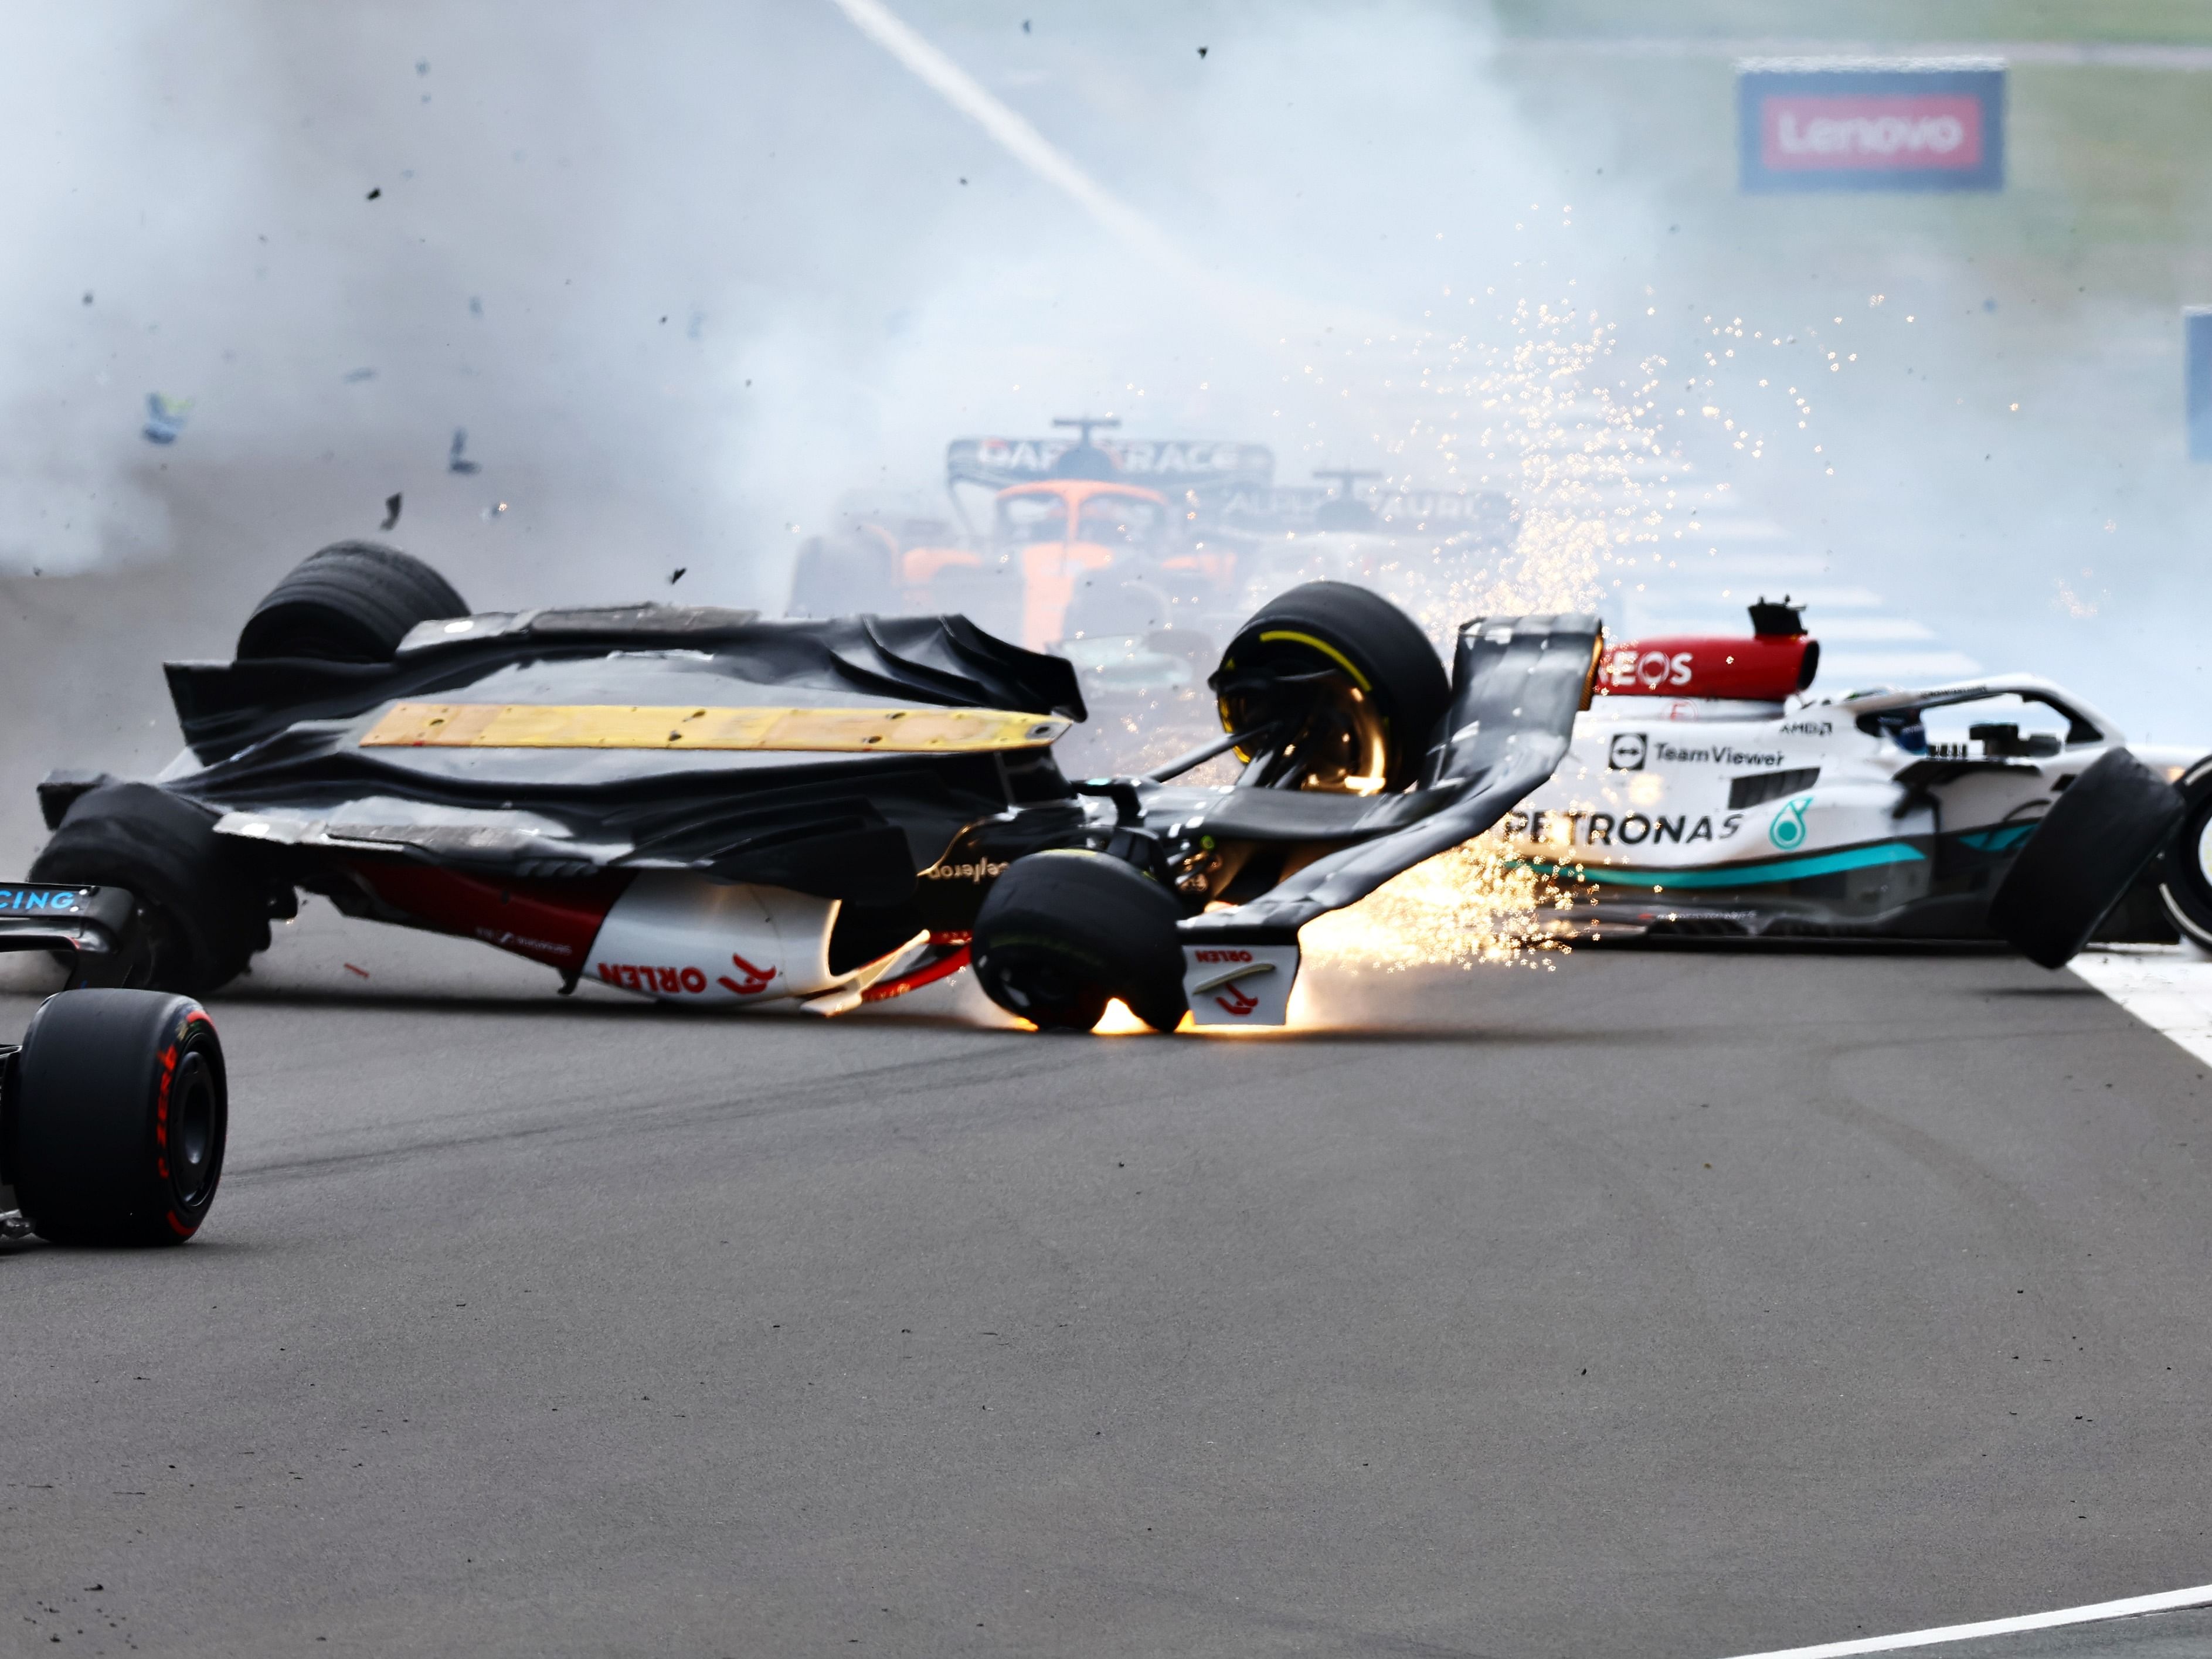 Zhou Guanyu (24) crashes at the start during the 2022 F1 British Grand Prix. (Photo by Mark Thompson/Getty Images)